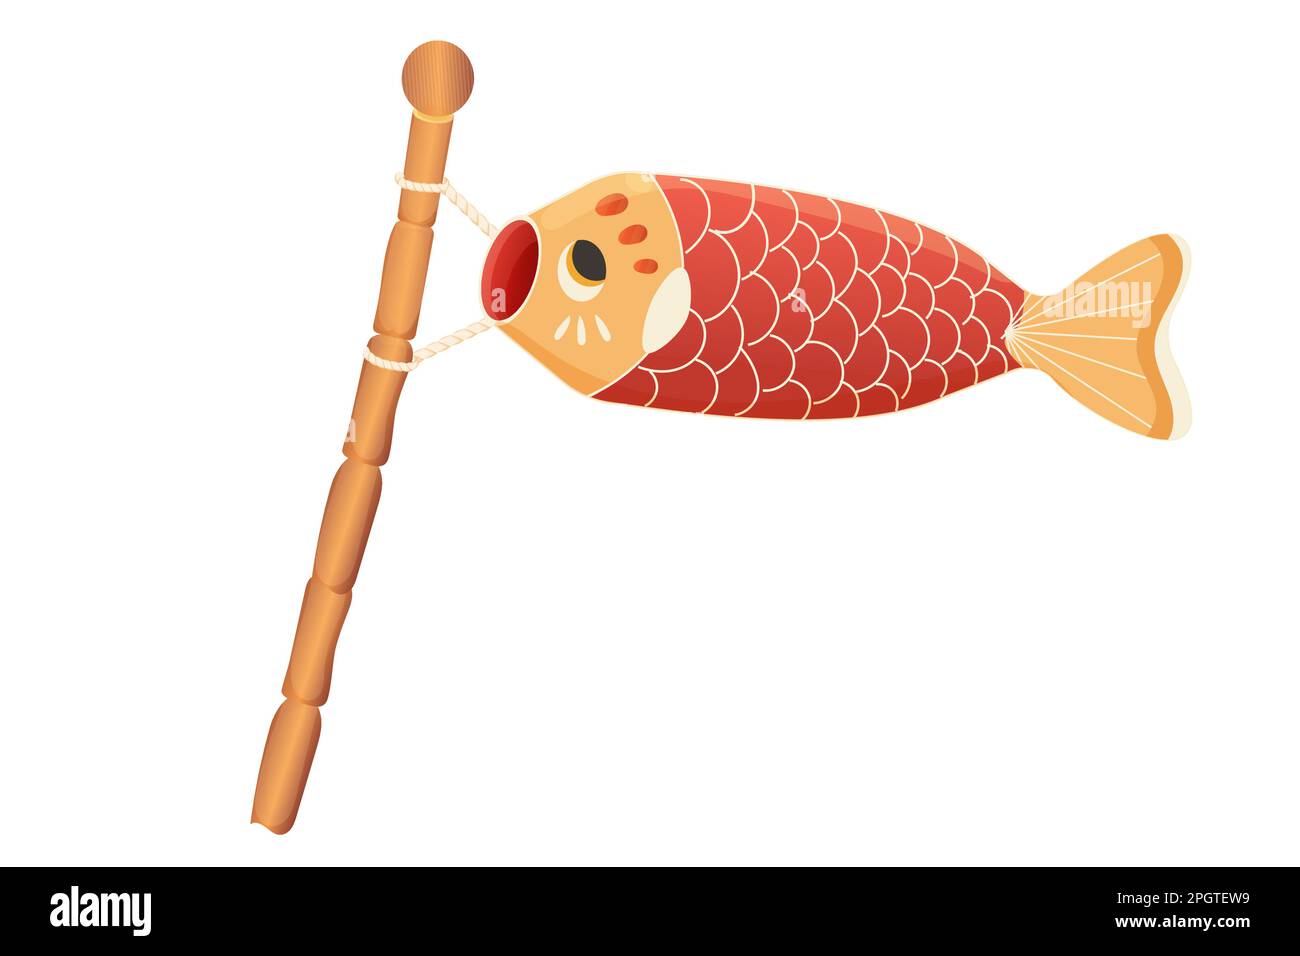 Fish pole bamboo Stock Vector Images - Alamy